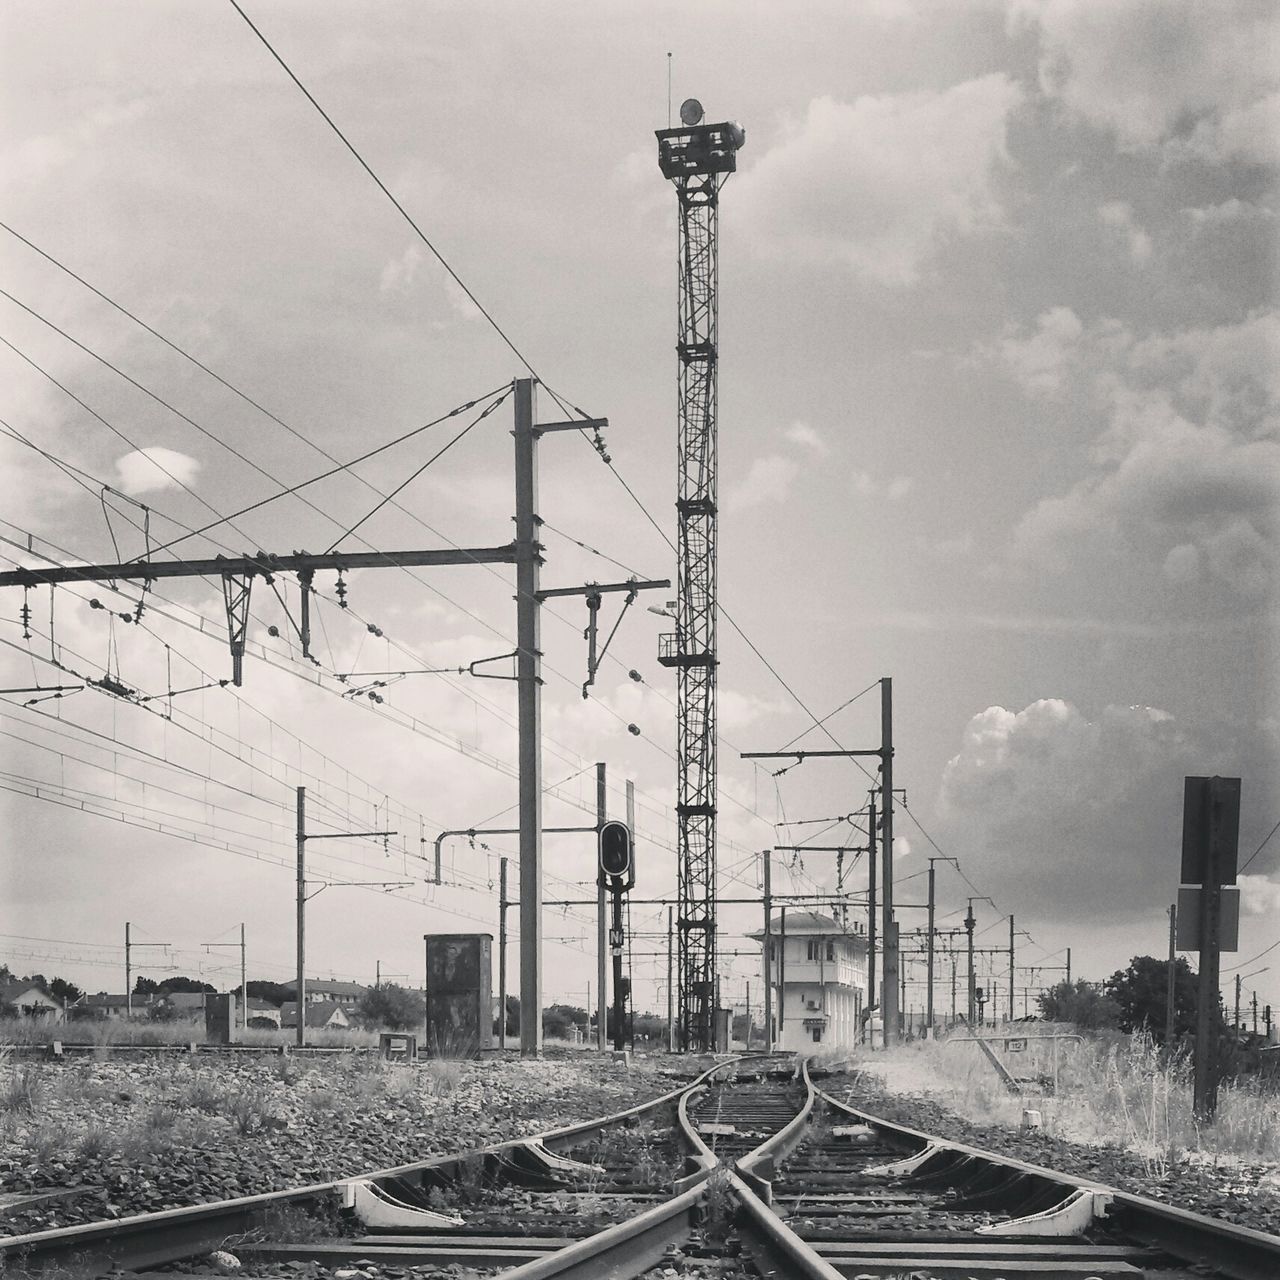 railroad track, transportation, electricity pylon, sky, power line, rail transportation, power supply, electricity, connection, cloud - sky, the way forward, built structure, road, fuel and power generation, cable, building exterior, architecture, public transportation, diminishing perspective, city